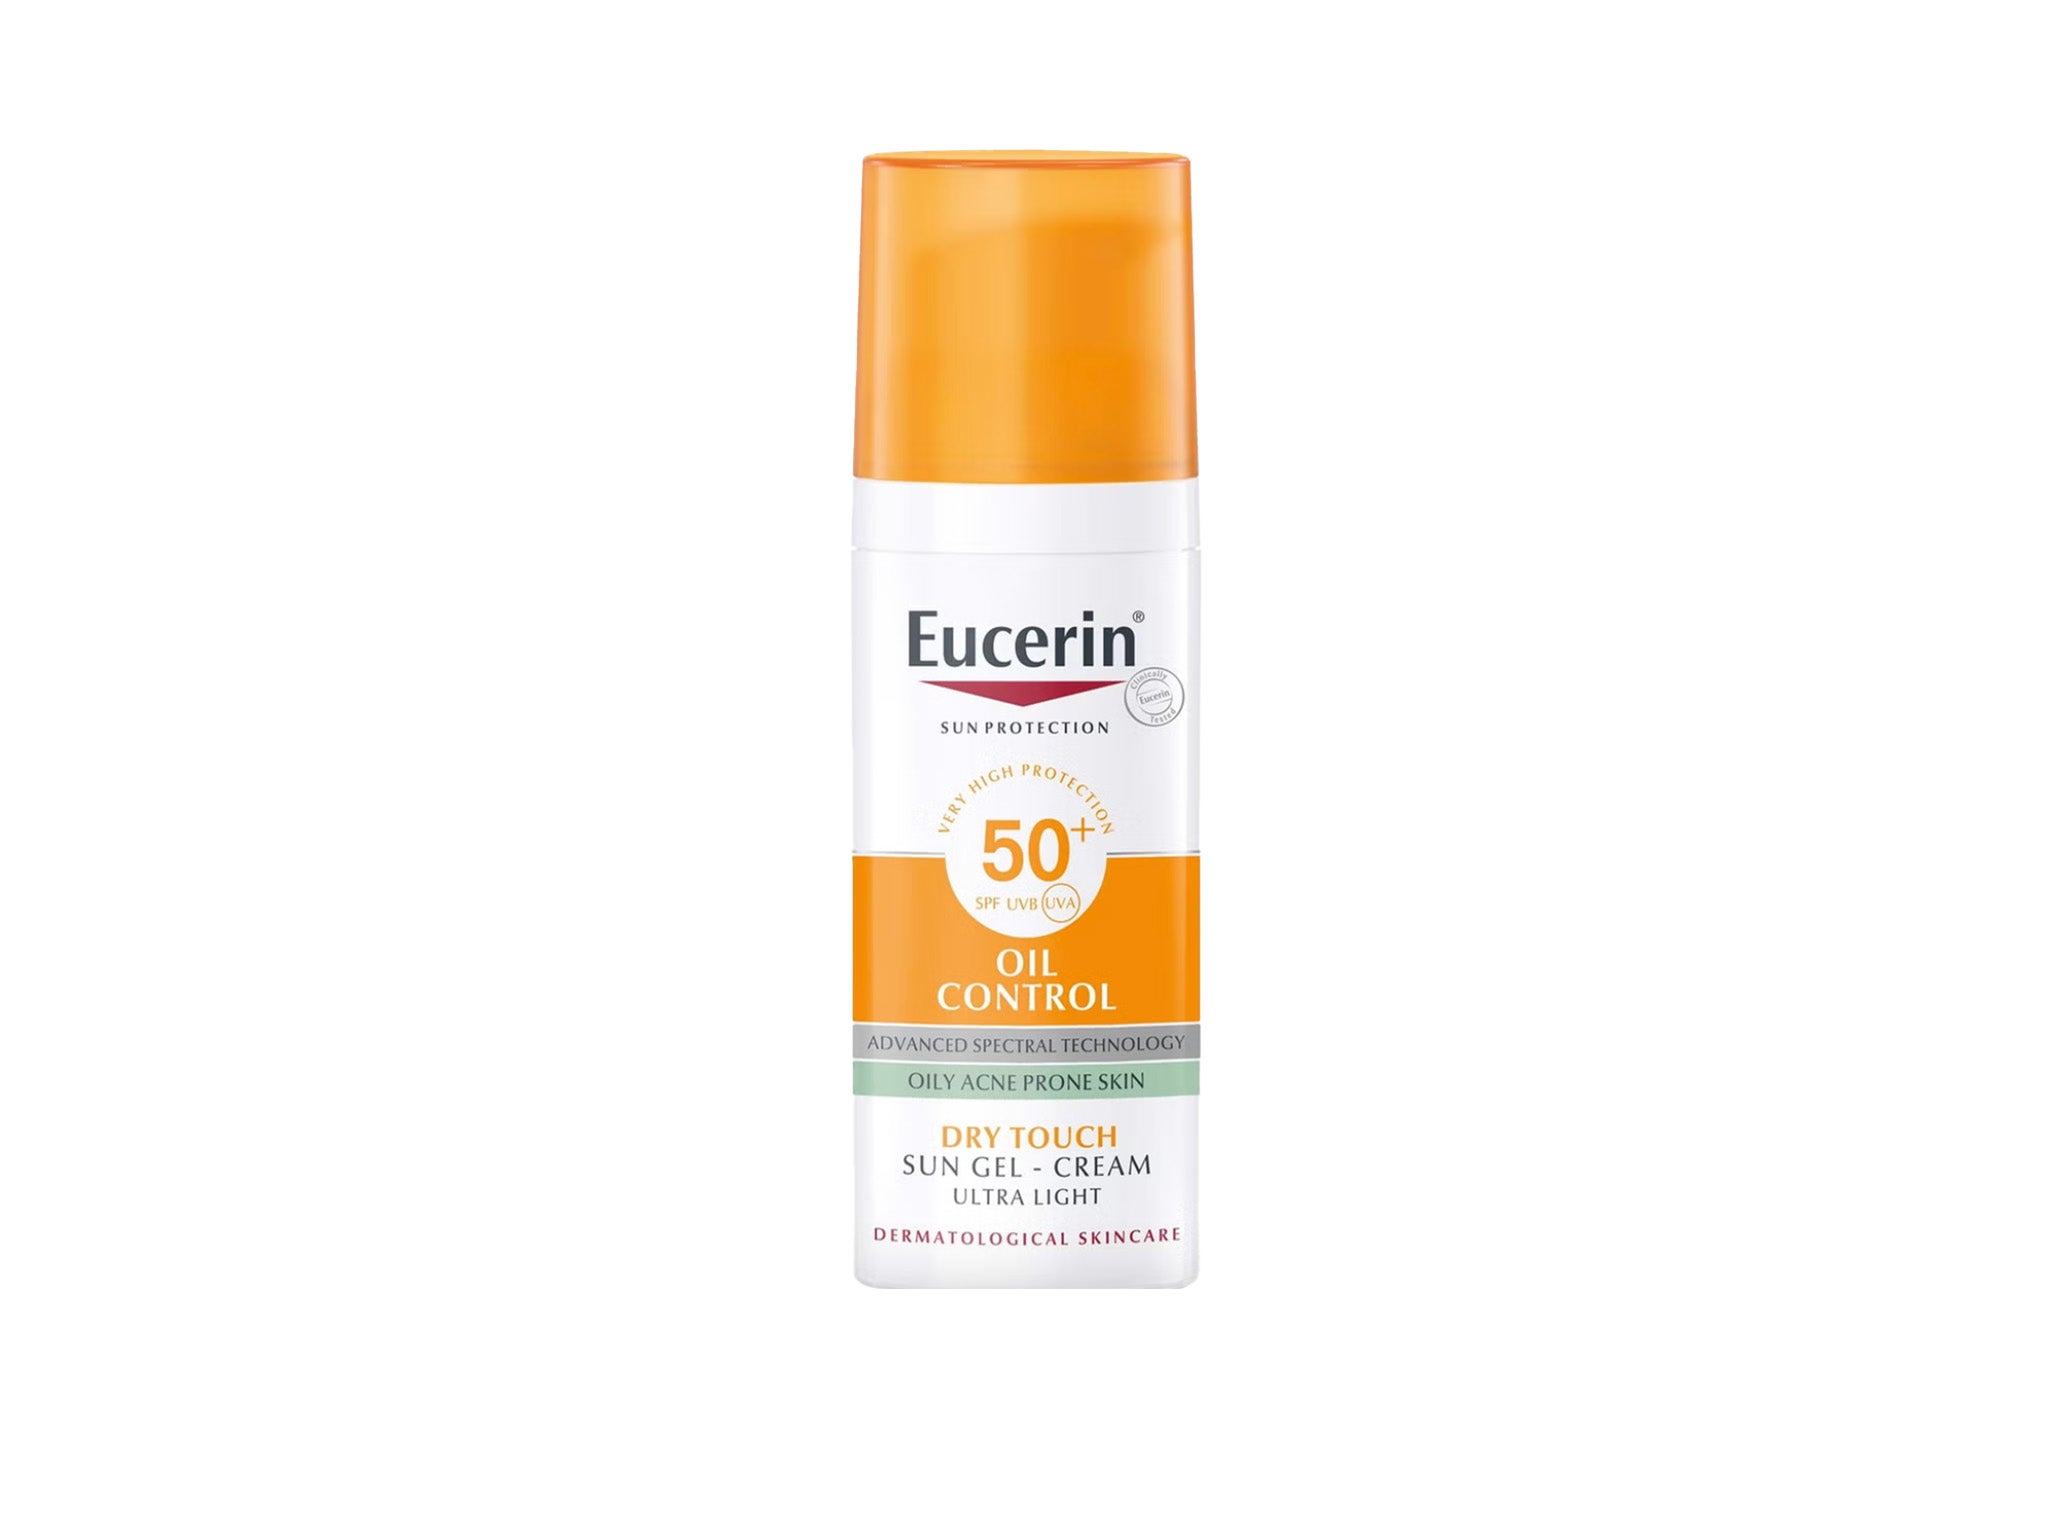 This is Dr Mahto’s favourite SPF for oily skin